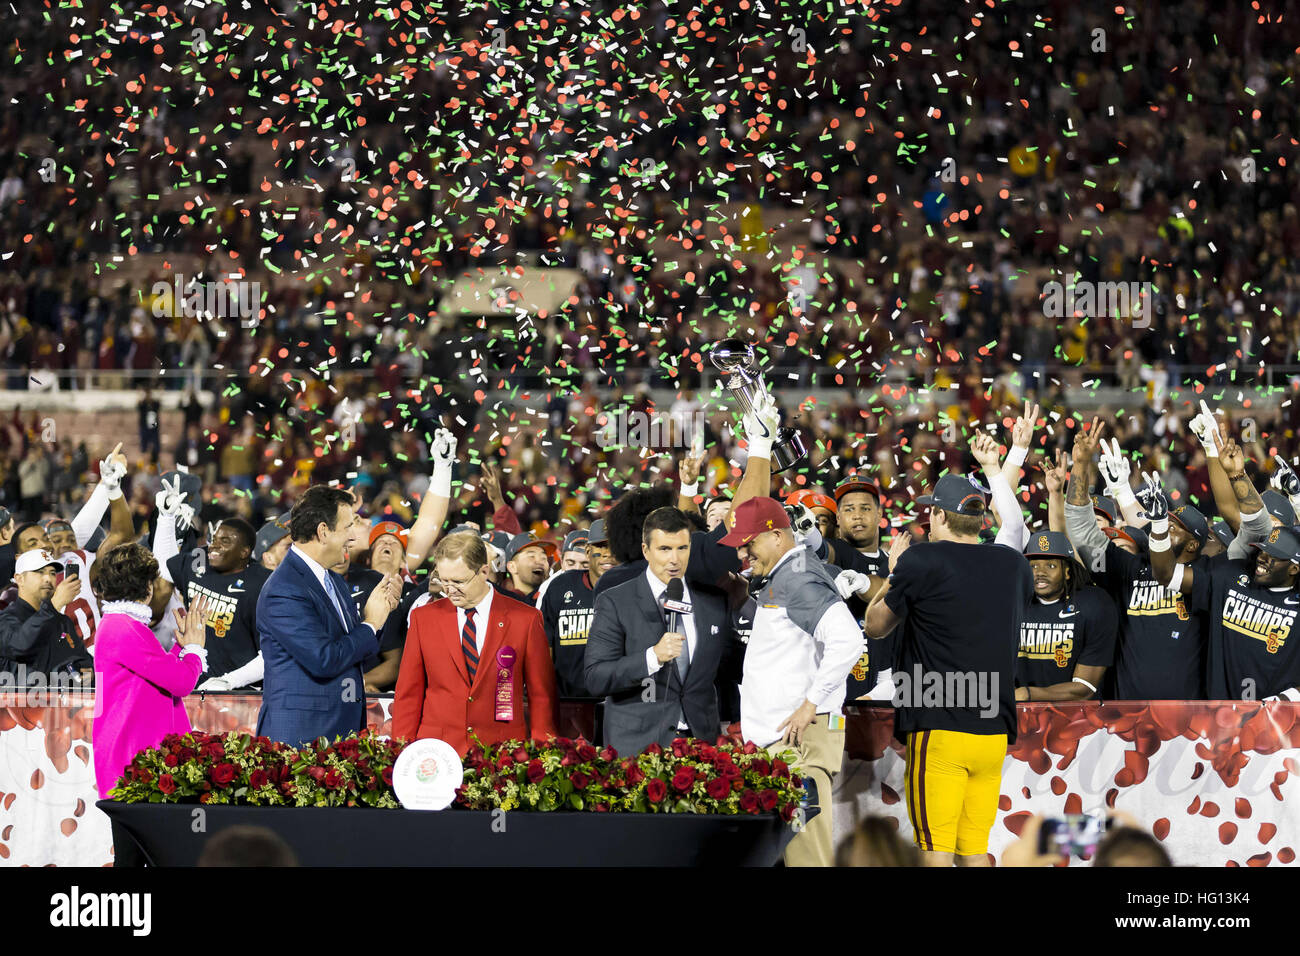 California, USA. 2nd Jan, 2017.  USC head coach Clay Helton being interviewed while the team holds up the Leishman Trophy after the Rose Bowl Game between Penn State Nittany Lions and University of Southern California Trojans at Rose Bowl Stadium in Pasadena, California. USC won 52-49. © Scott Taetsch/ZUMA Wire/Alamy Live News Stock Photo